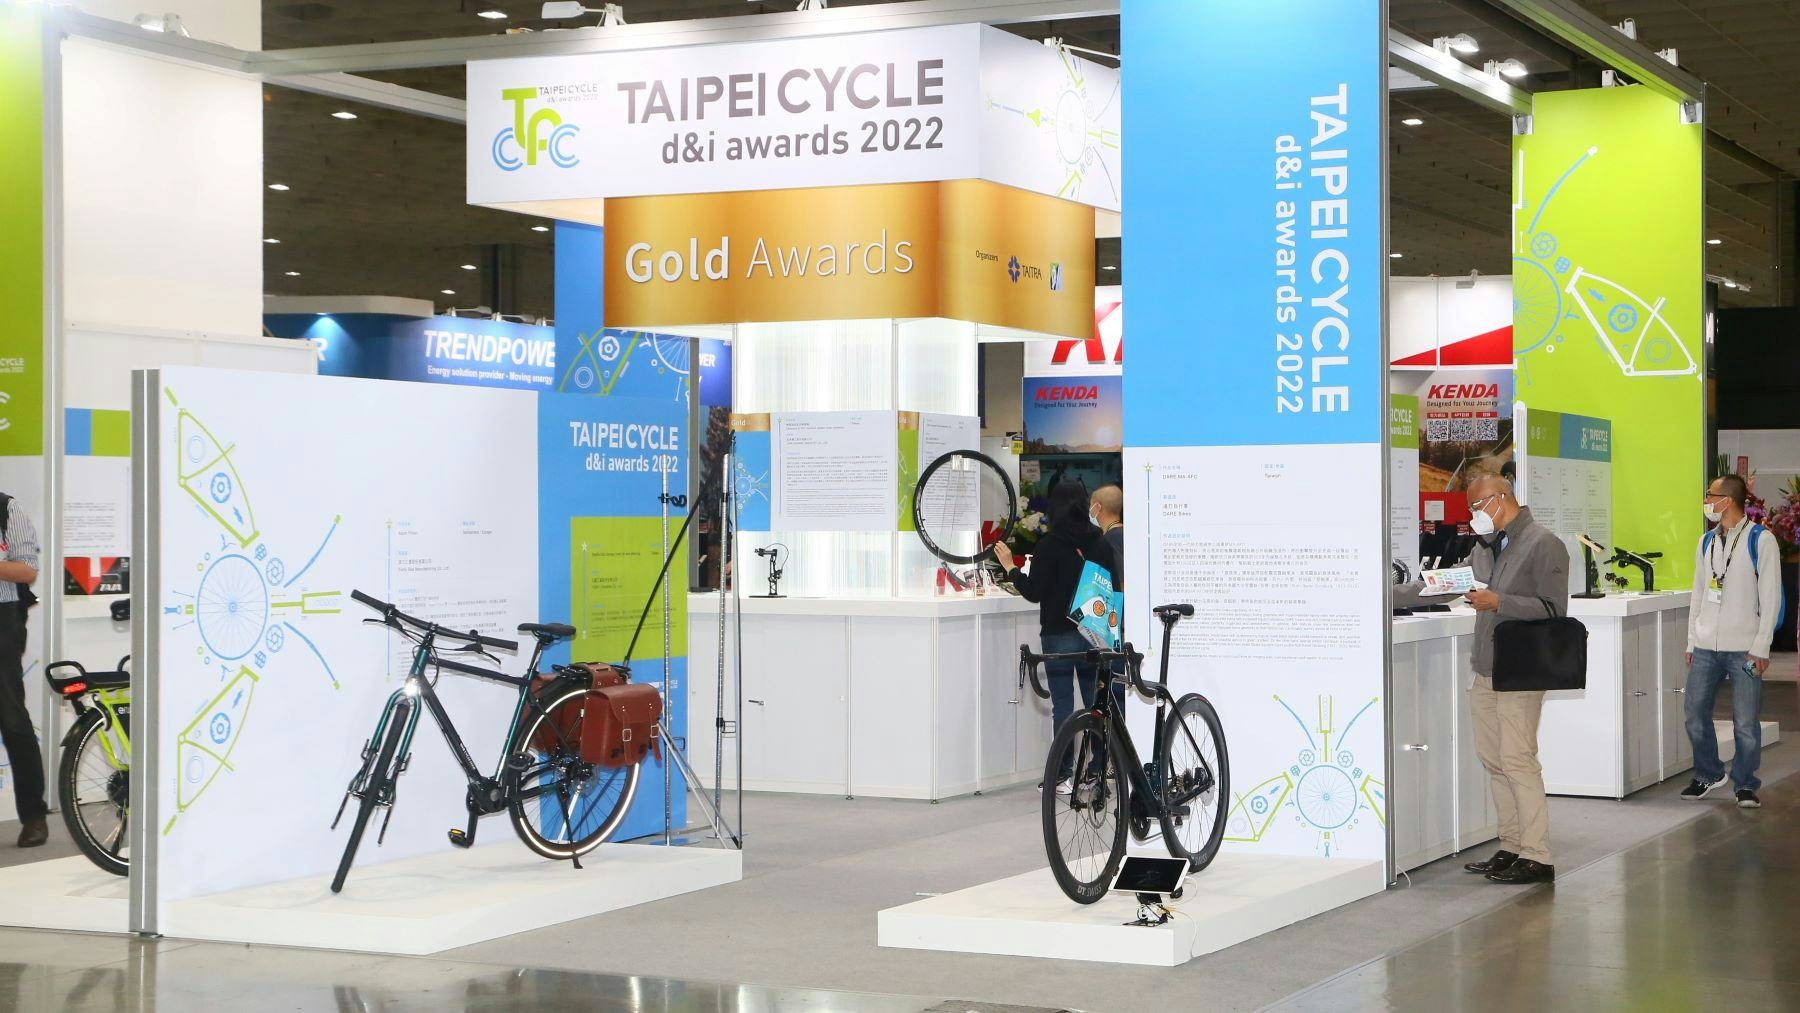 Winners of d&I awards will be showcased at the Taipei Cycle show in March 2023. – Photo Taipei Cycle